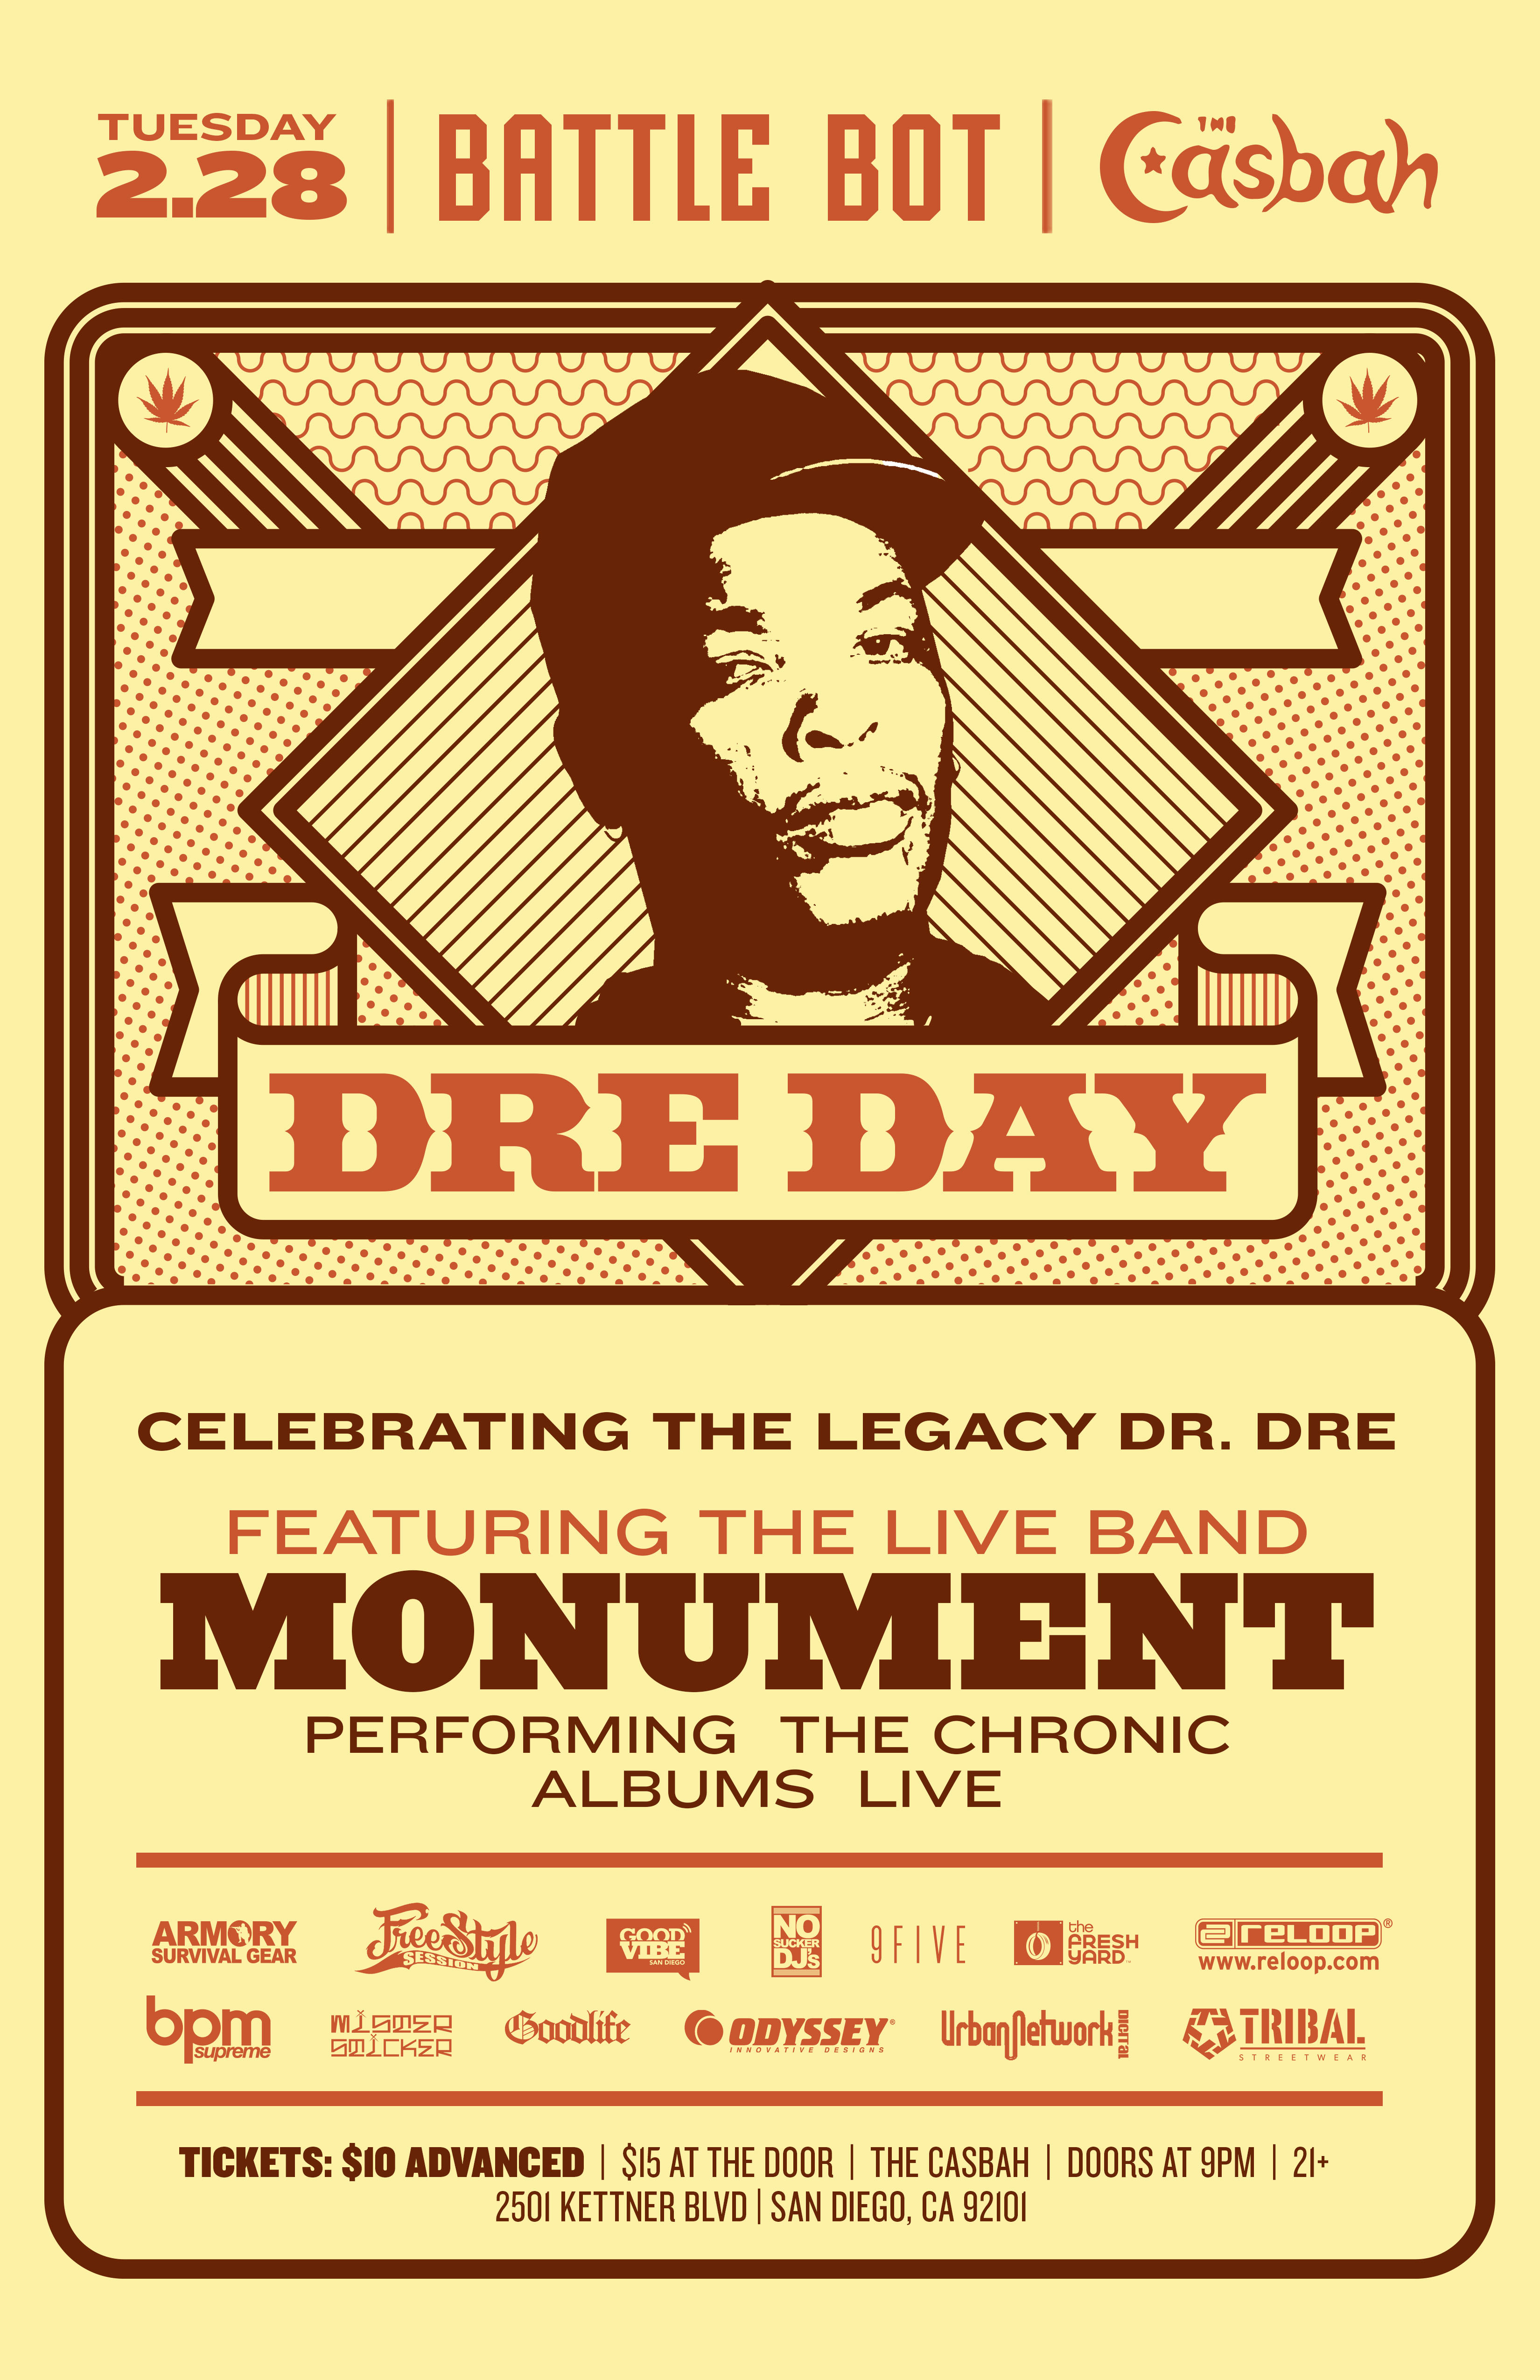 Battle Bot special “Dre Day” edition at the Casbah